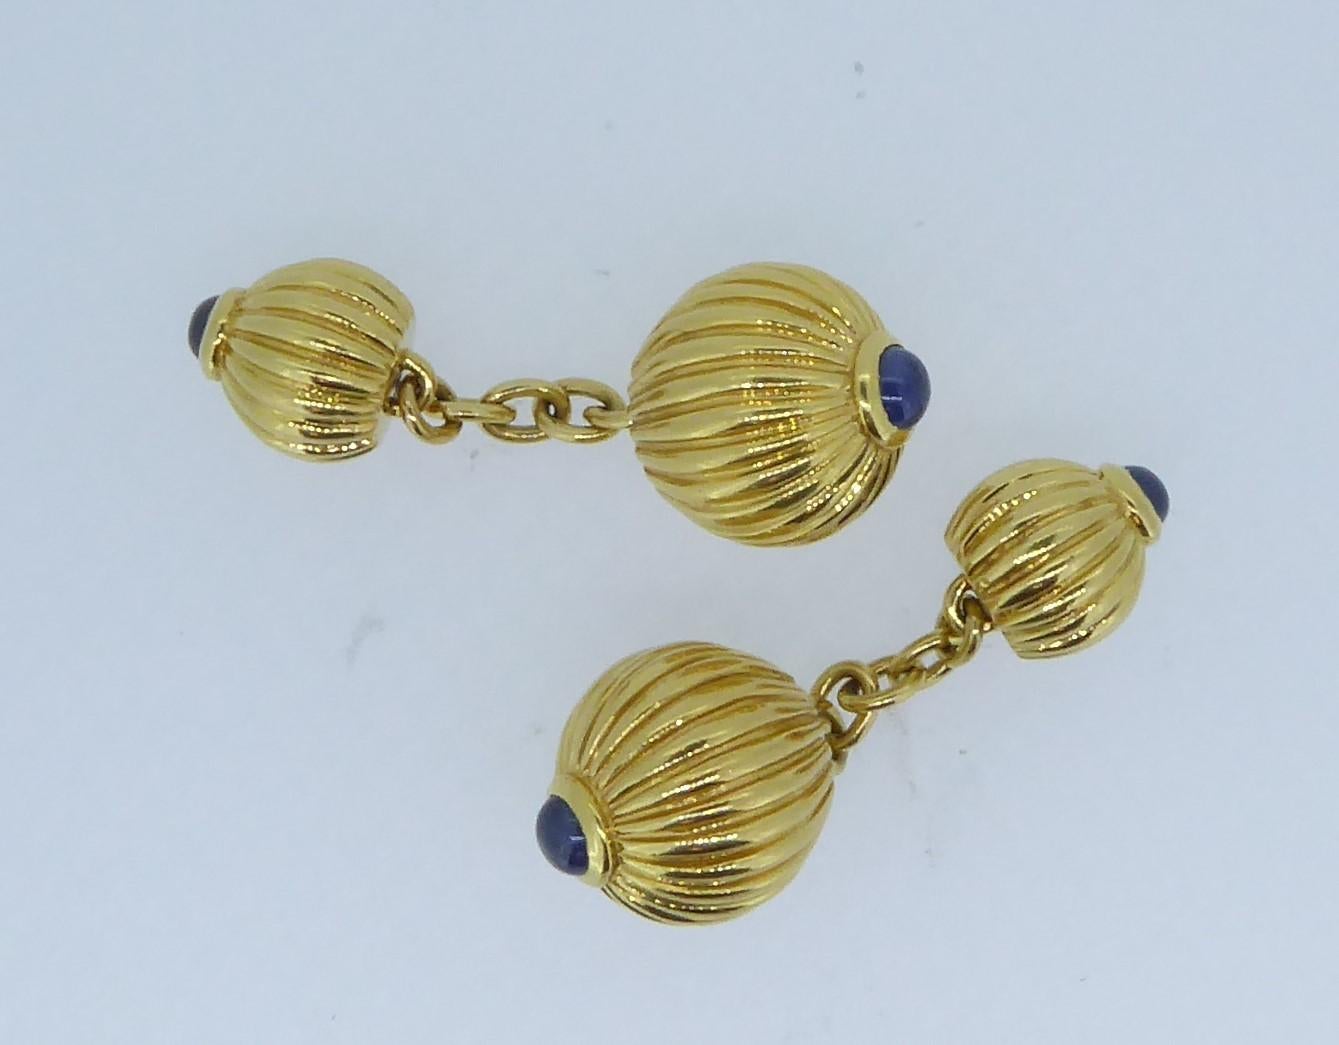 Pair of Cartier 18 Carat Yellow And Blue Sapphire Melon Bead Cufflinks. The four yellow gold ridged each topped with a cabochon blue sapphire. Signed 